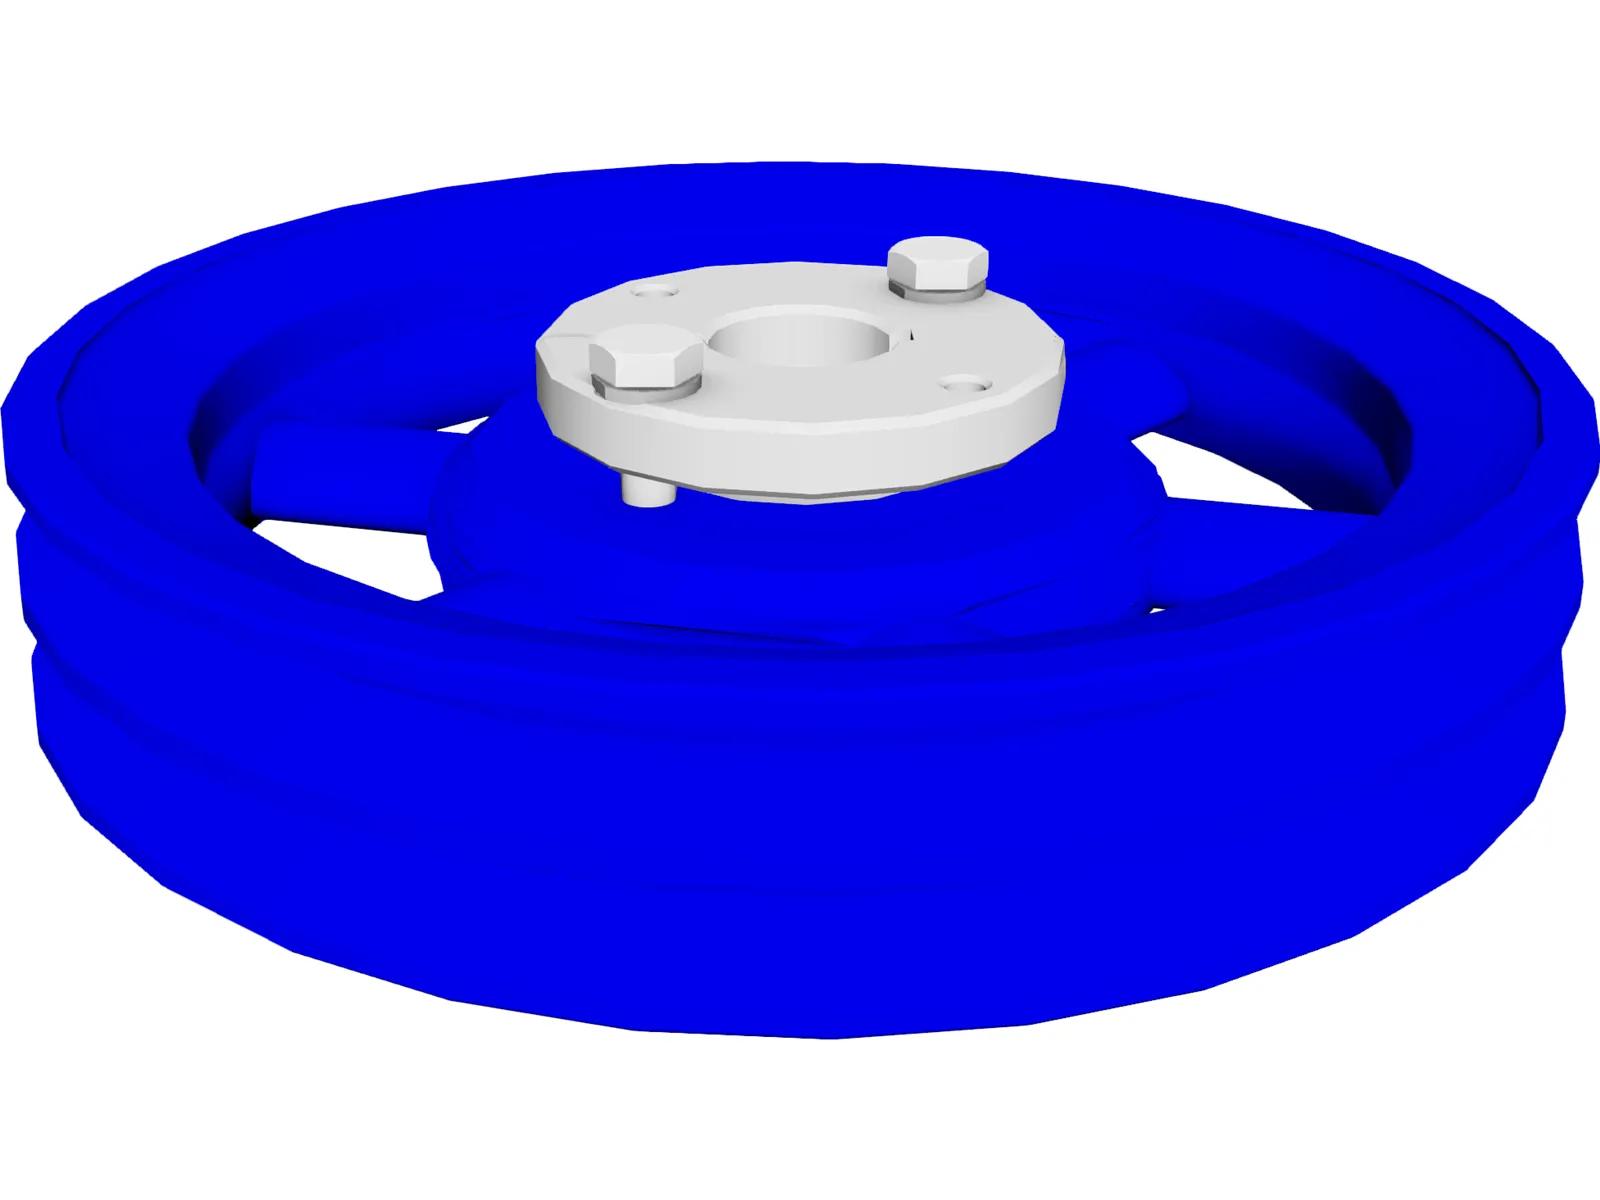 Pulley of 7.2 Inches Diameter 3D Model